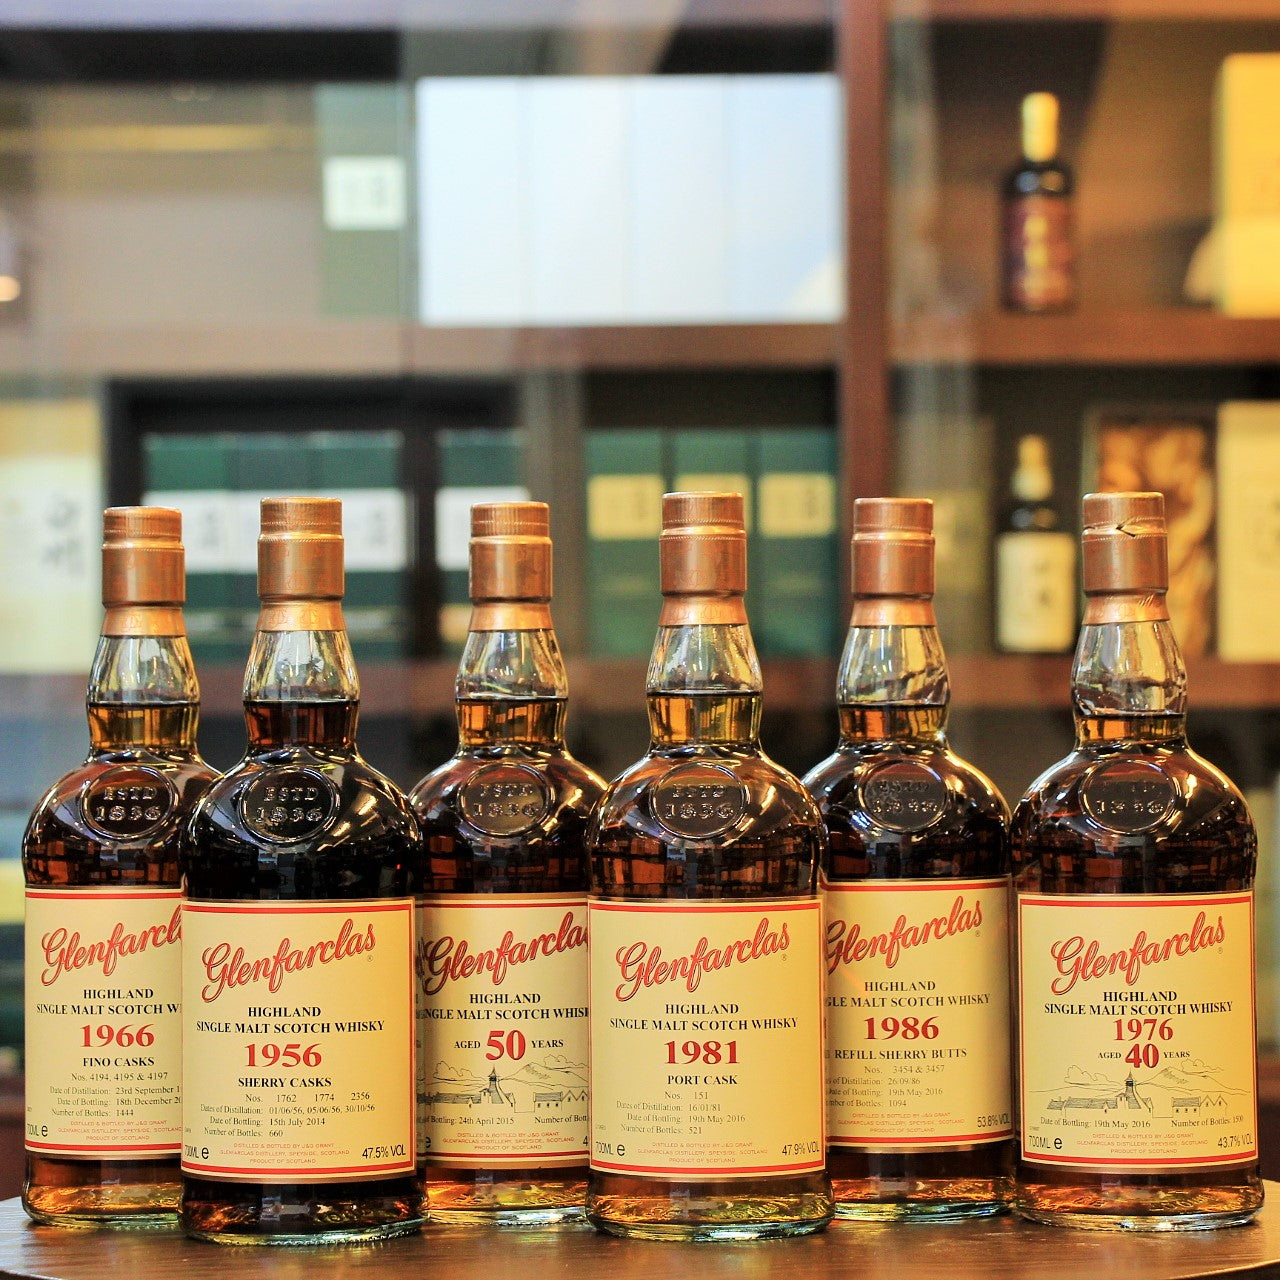 Mizunara The Shop in Hong Kong which has an exclsive collection of rare & vintage Japanese and Scotch whiskies has now got an exclusive set of Glenfarclas Whisky Set on Offer.